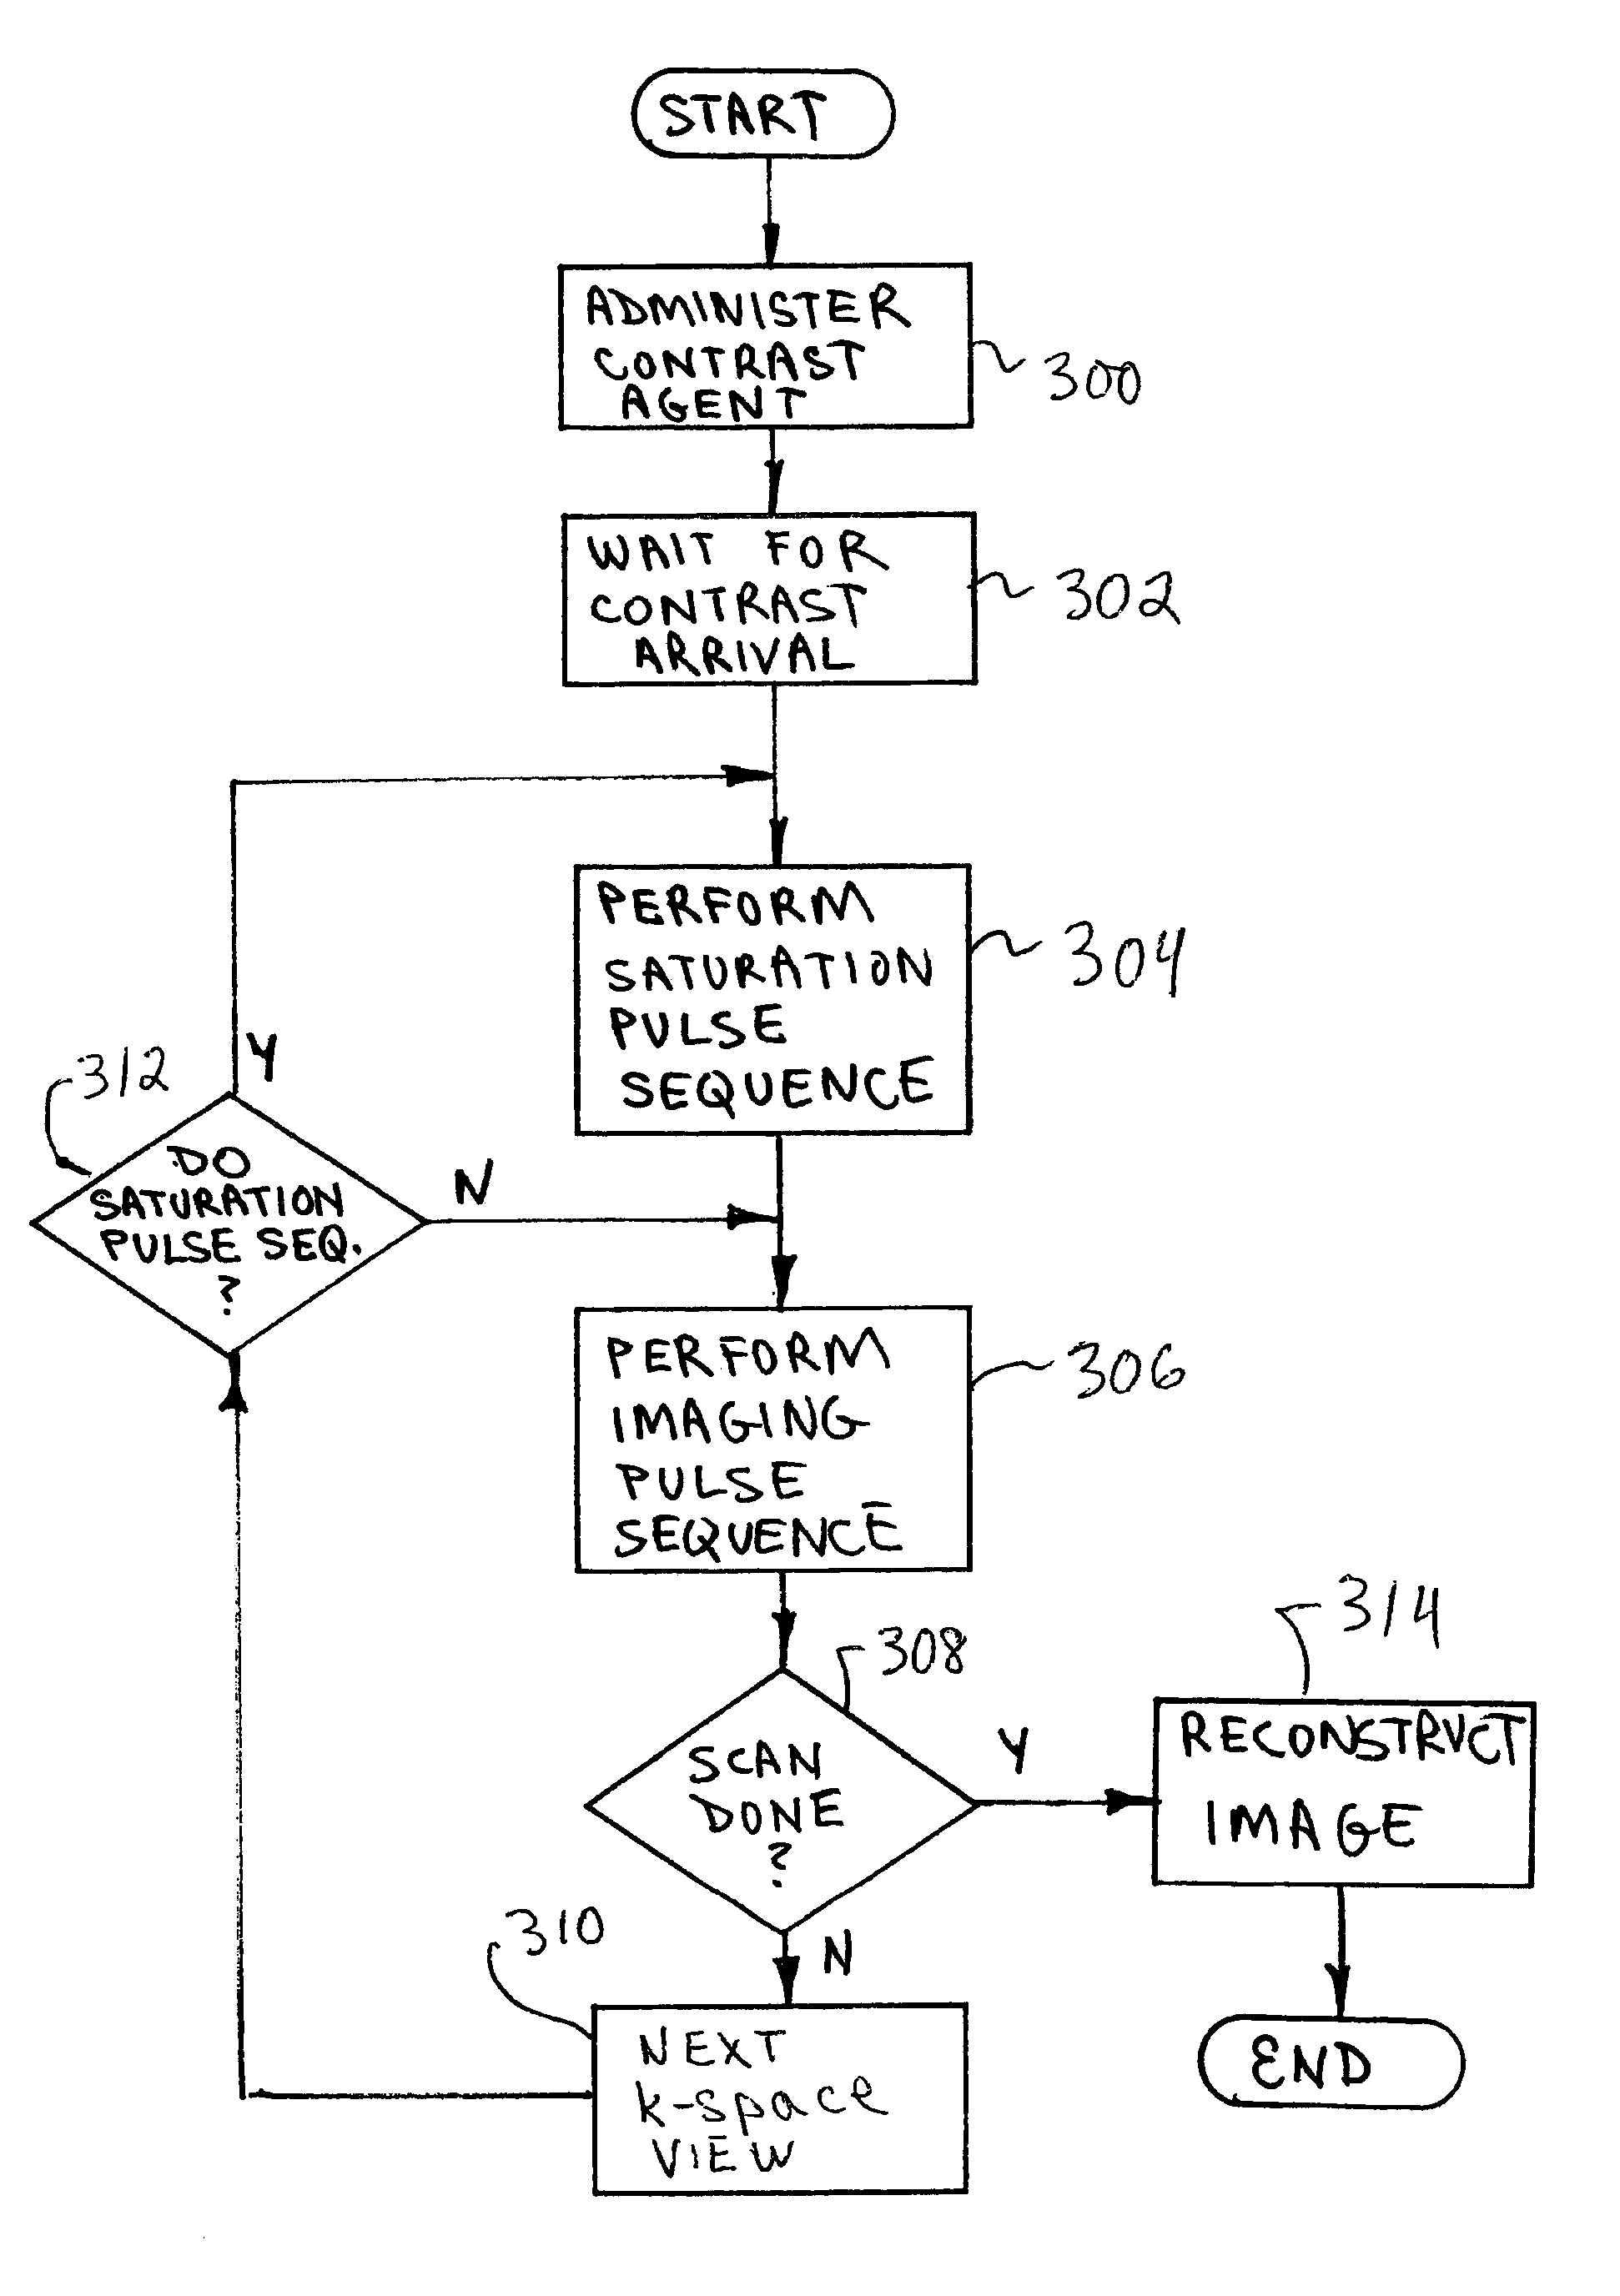 Magnetic resonance image acquisition with suppression of background tissues and RF water excitation at offset frequency